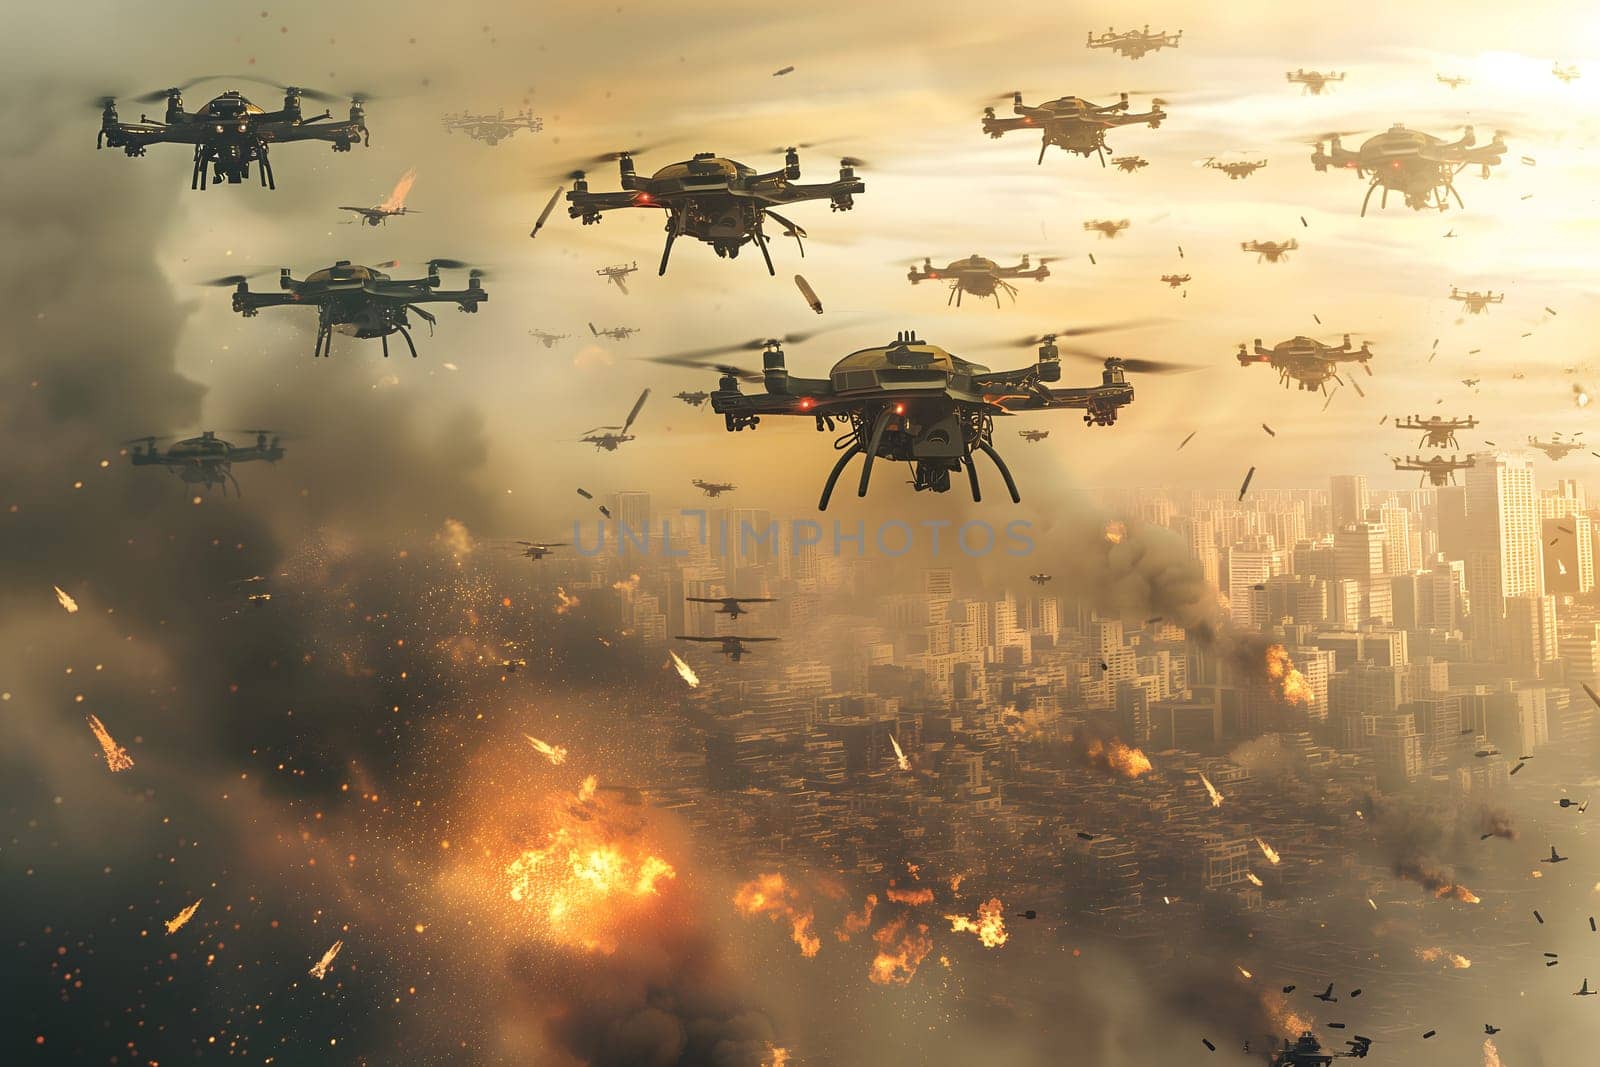 swarm of flying drones above burning city at day time by z1b